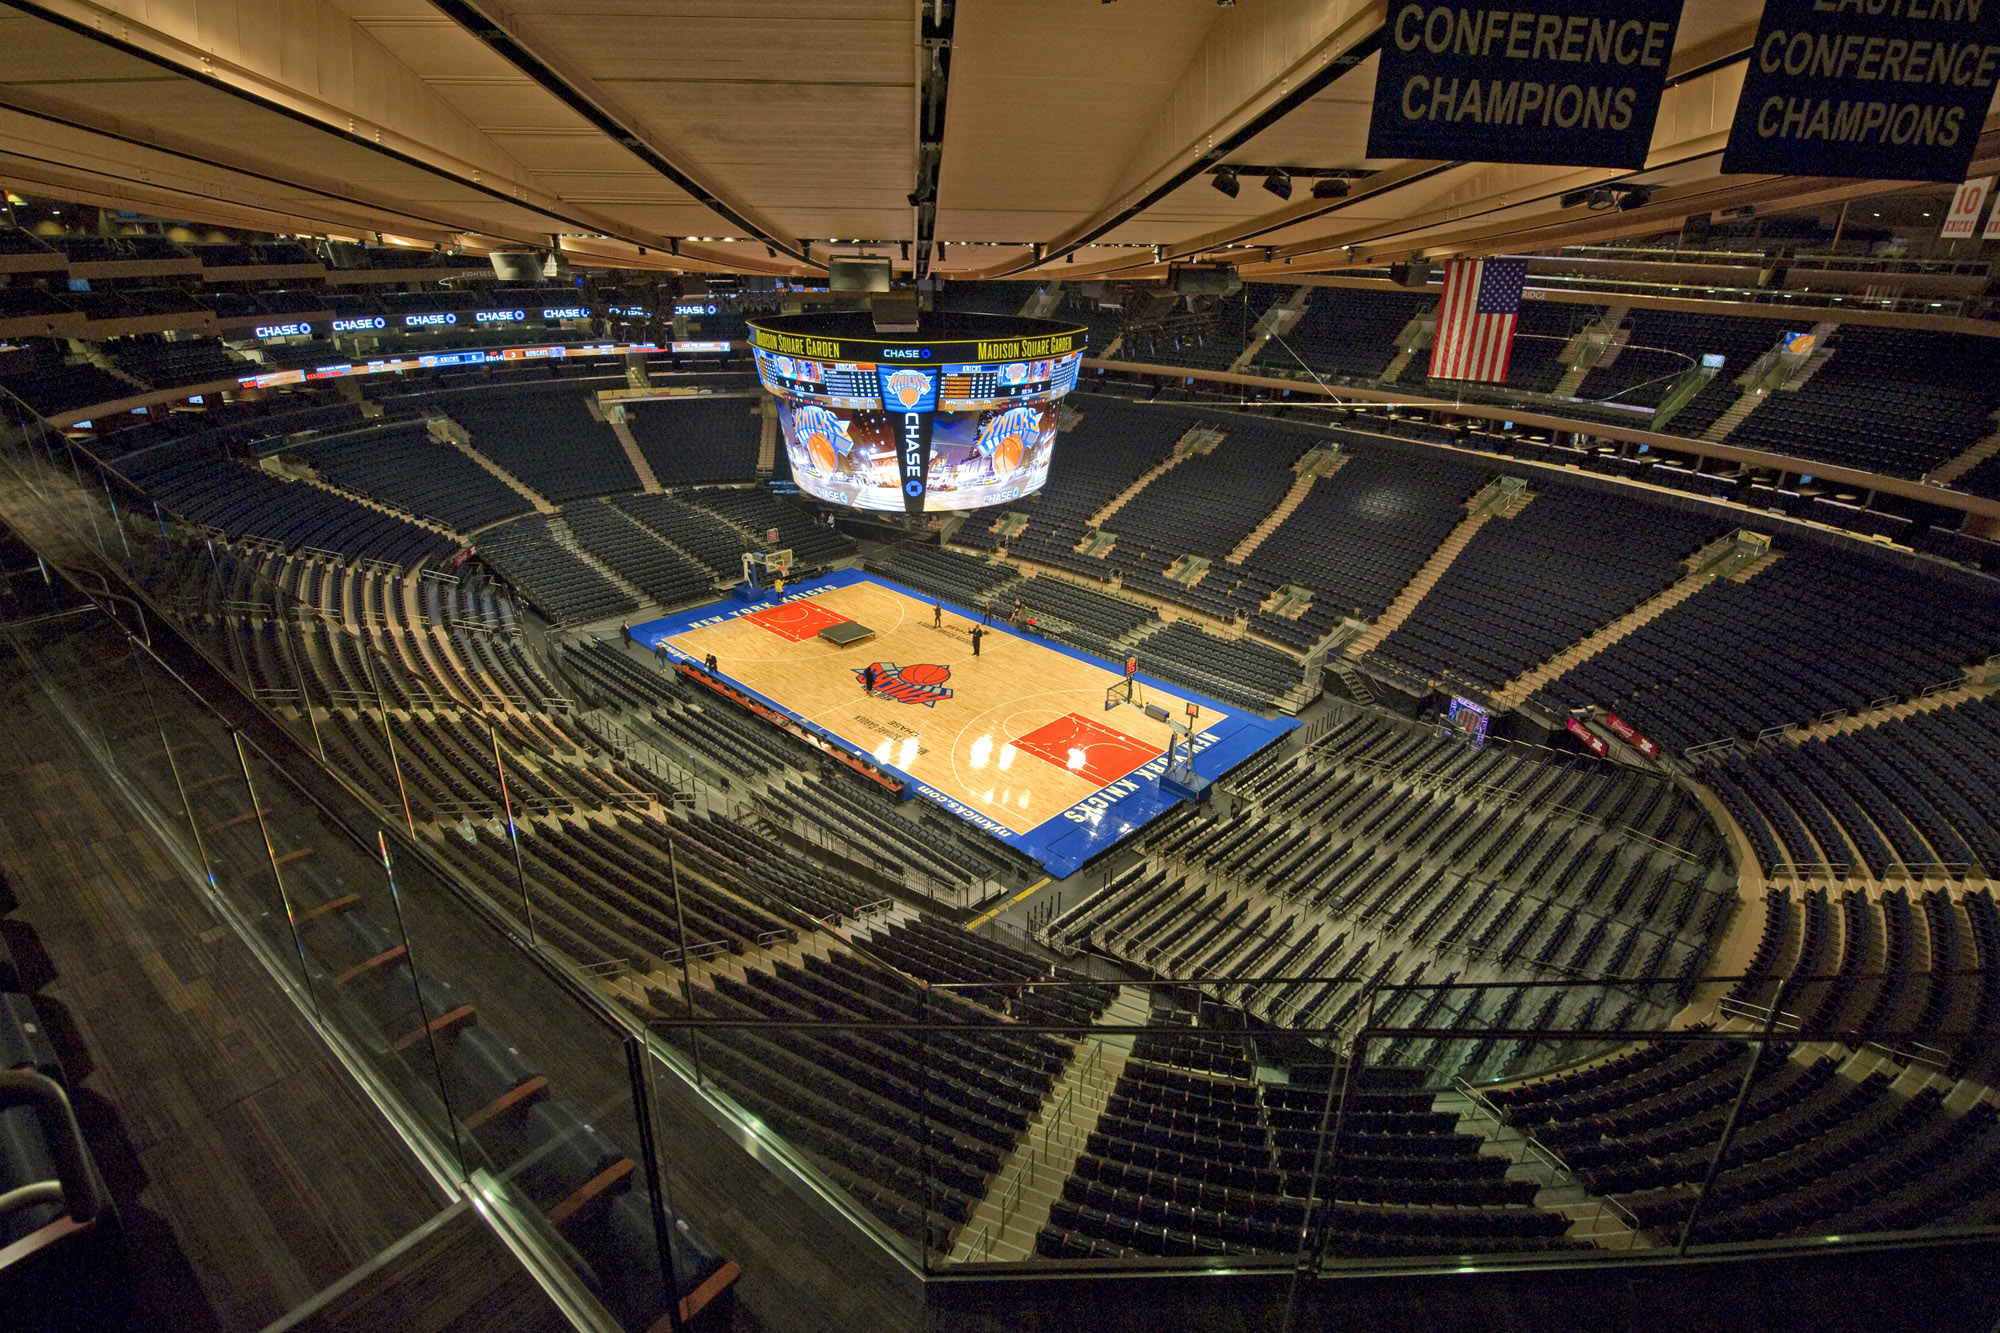 Year-long payment card breach discovered at Madison Square Garden